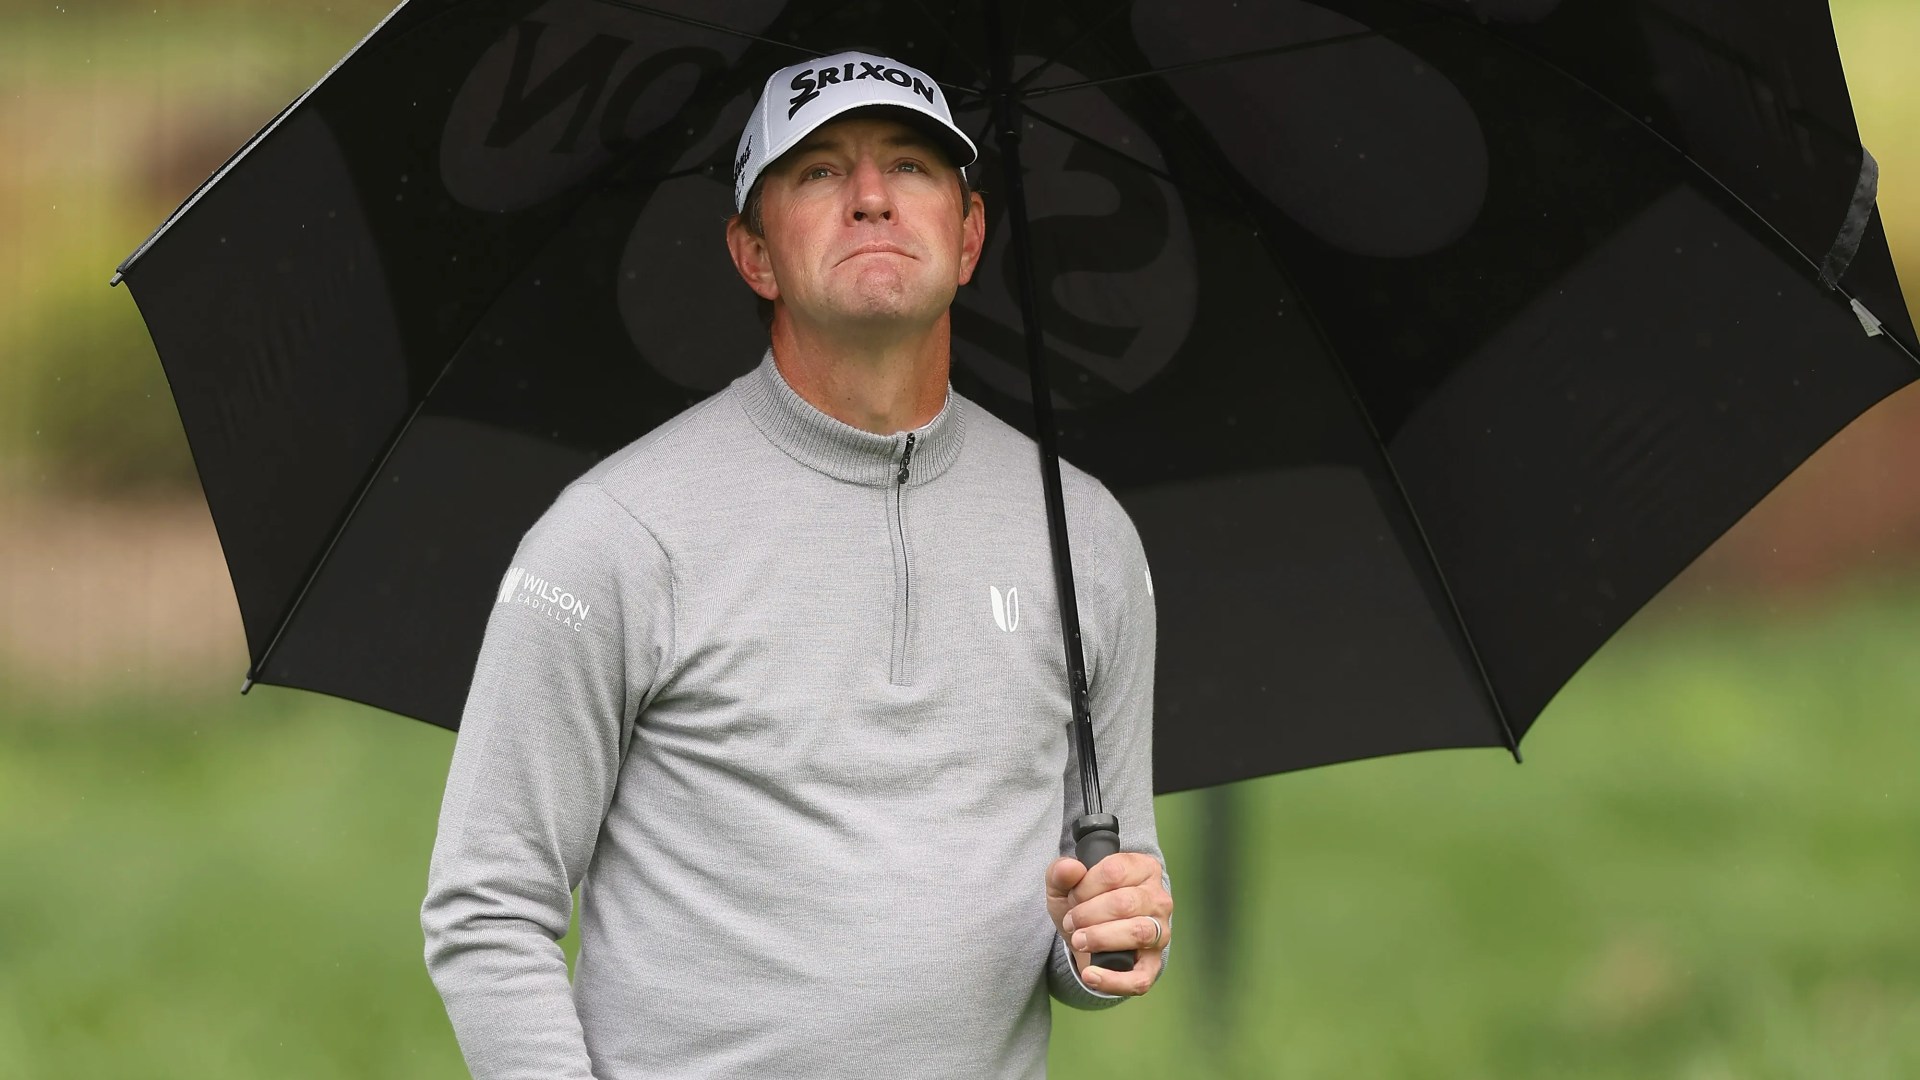 'I'm laughing at myself' - Golfer Lucas Glover booted out of iconic PGA Tour event after missing tee time